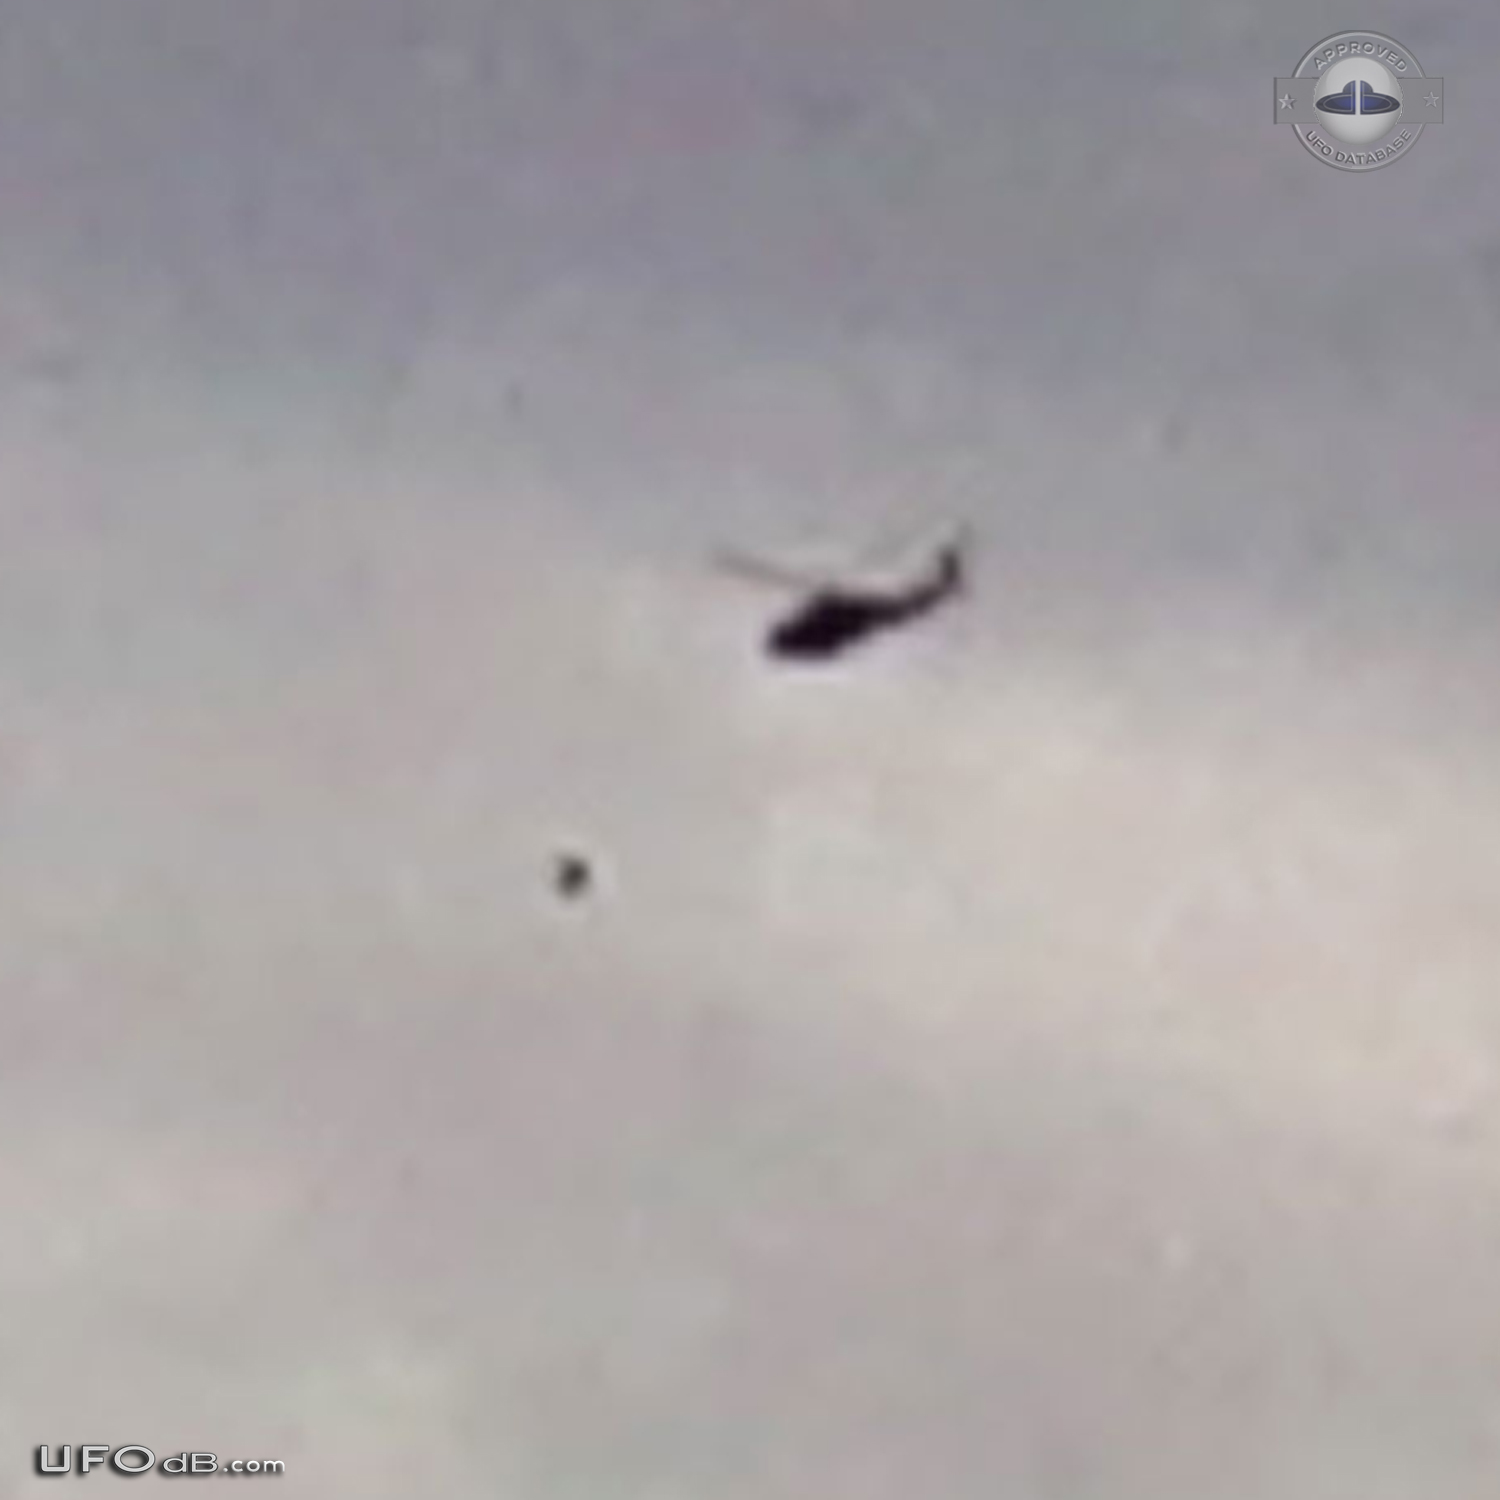 Incredible UFO sighting | 2 helicopters chasing saucer - Illinois 2012 UFO Picture #504-4